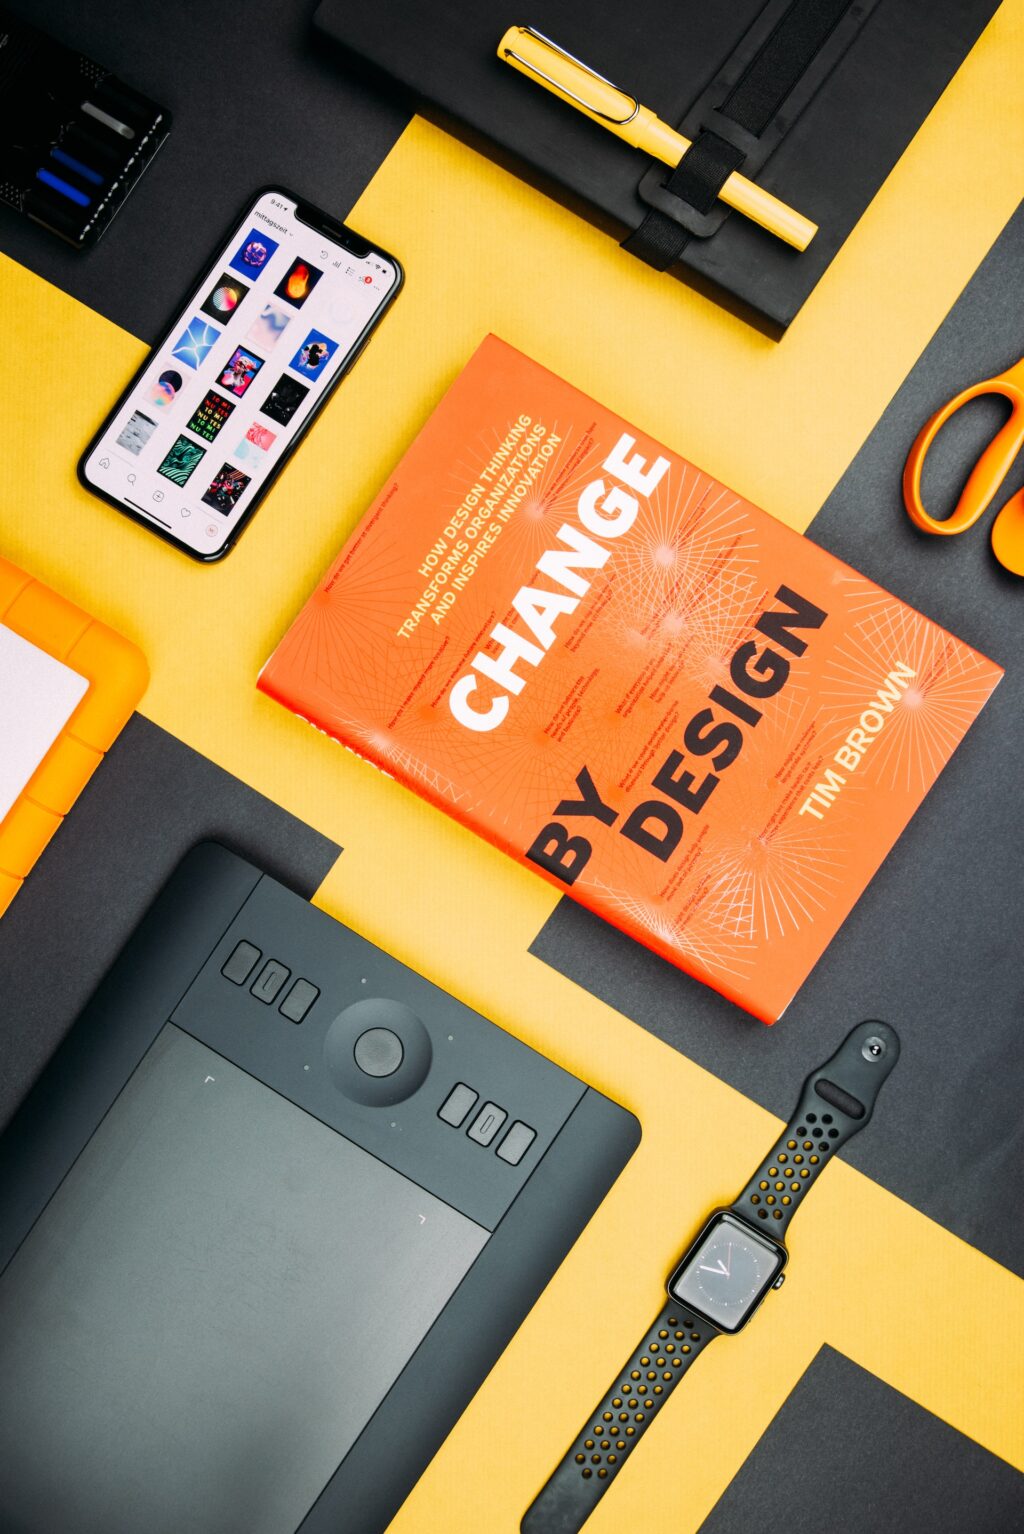 Books on a yellow table about UX design strategy